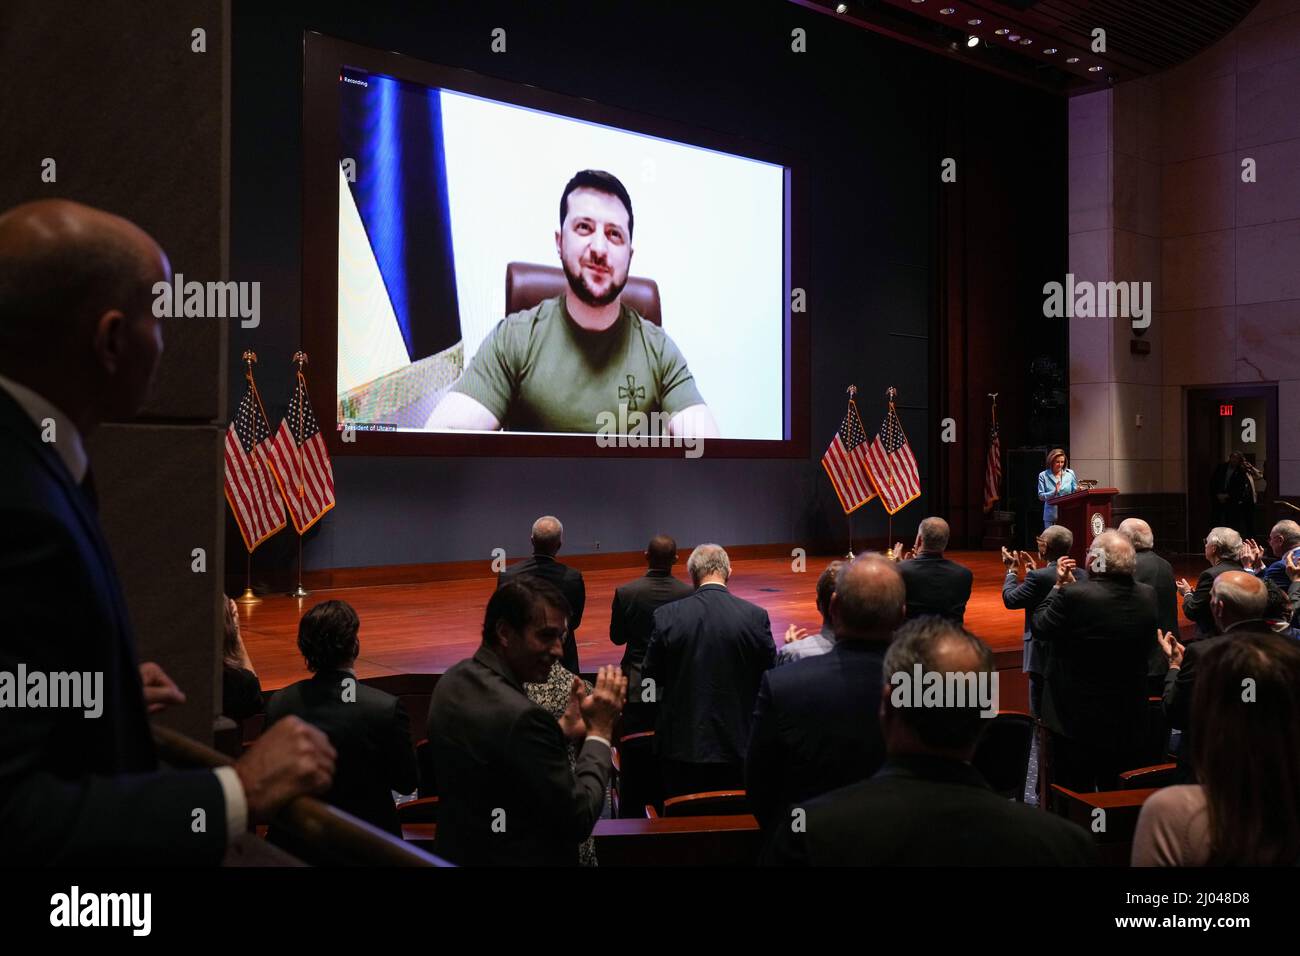 President Volodymyr Zelenskyy of Ukraine delivers a virtual address to Congress in the U.S. Capitol Visitors Center Congressional Auditorium in Washington, D.C. on Wednesday, March 16, 2022. Credit: Sarahbeth Maney / Pool via CNP Stock Photo